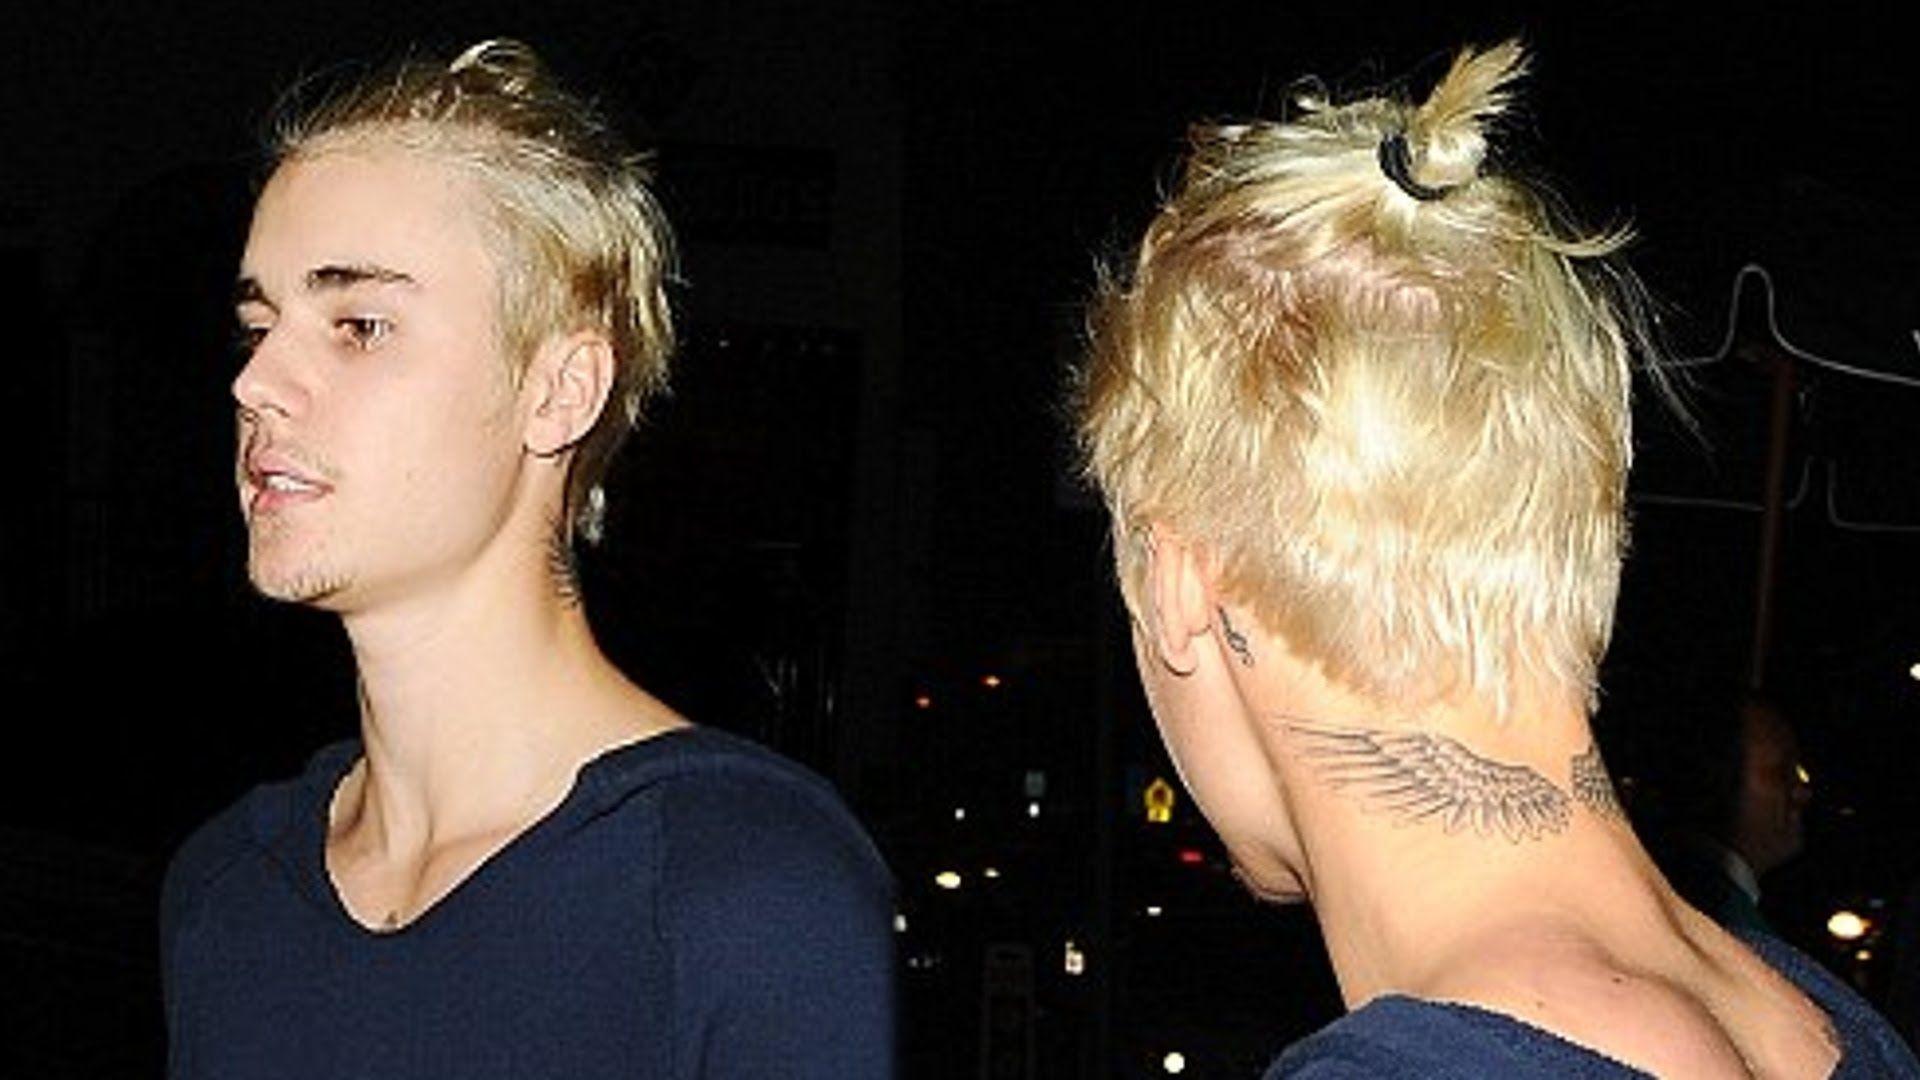 New Hair Style. Best Hair Style justin bieber hairstyle for 2016